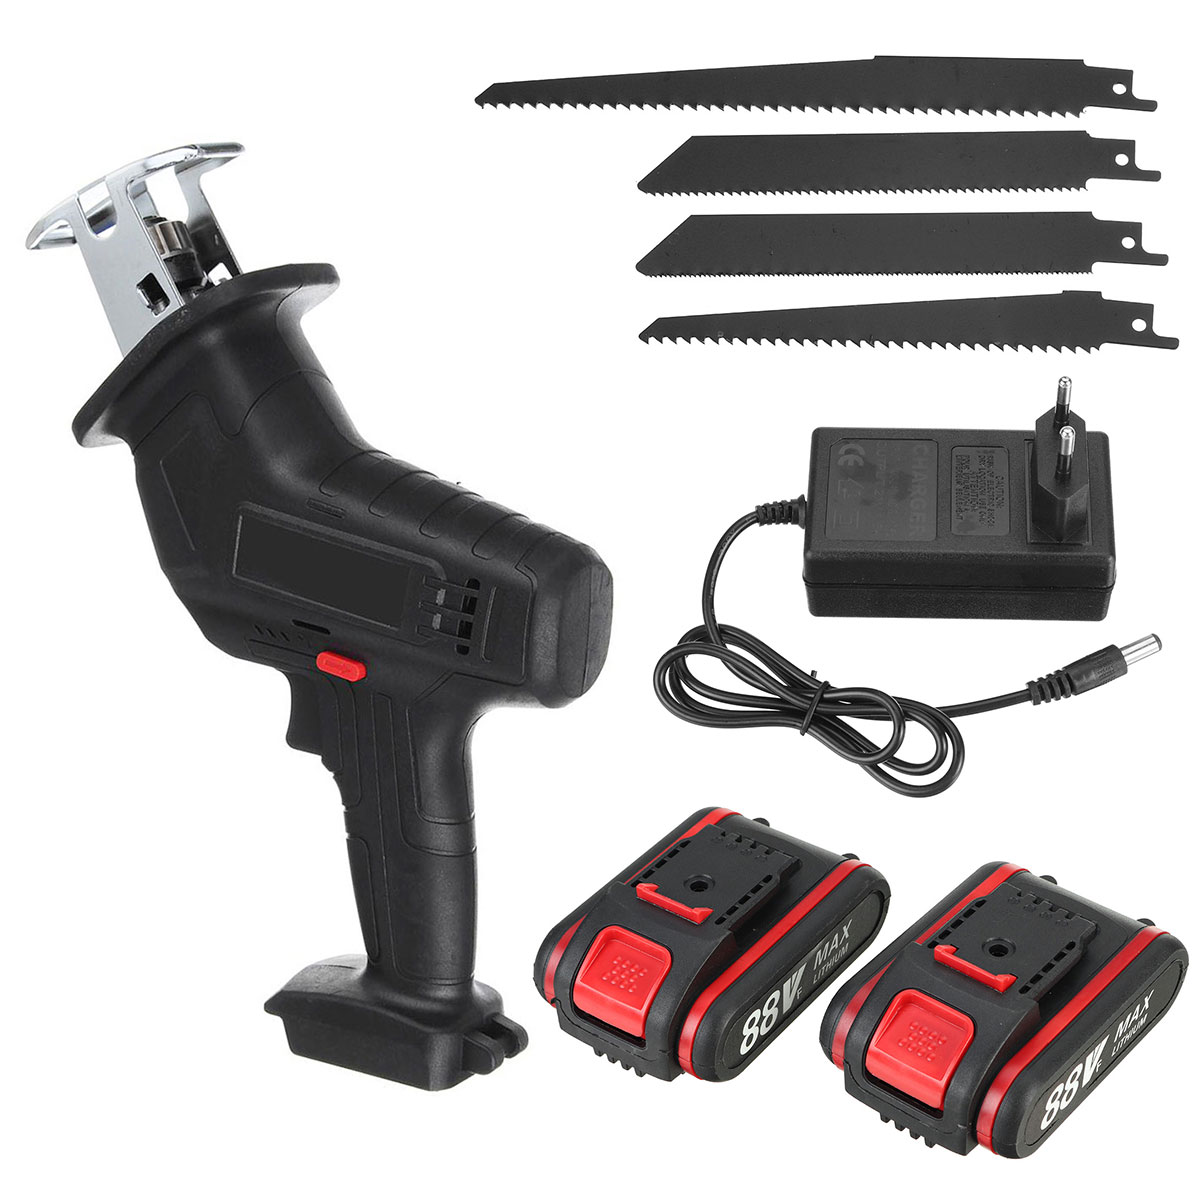 88VF-Cordless-Rechargeable-Electric-Reciprocating-Saw-Portable-Wood-Metal-Plastic-Cutting-Tool-W-1-o-1772566-8